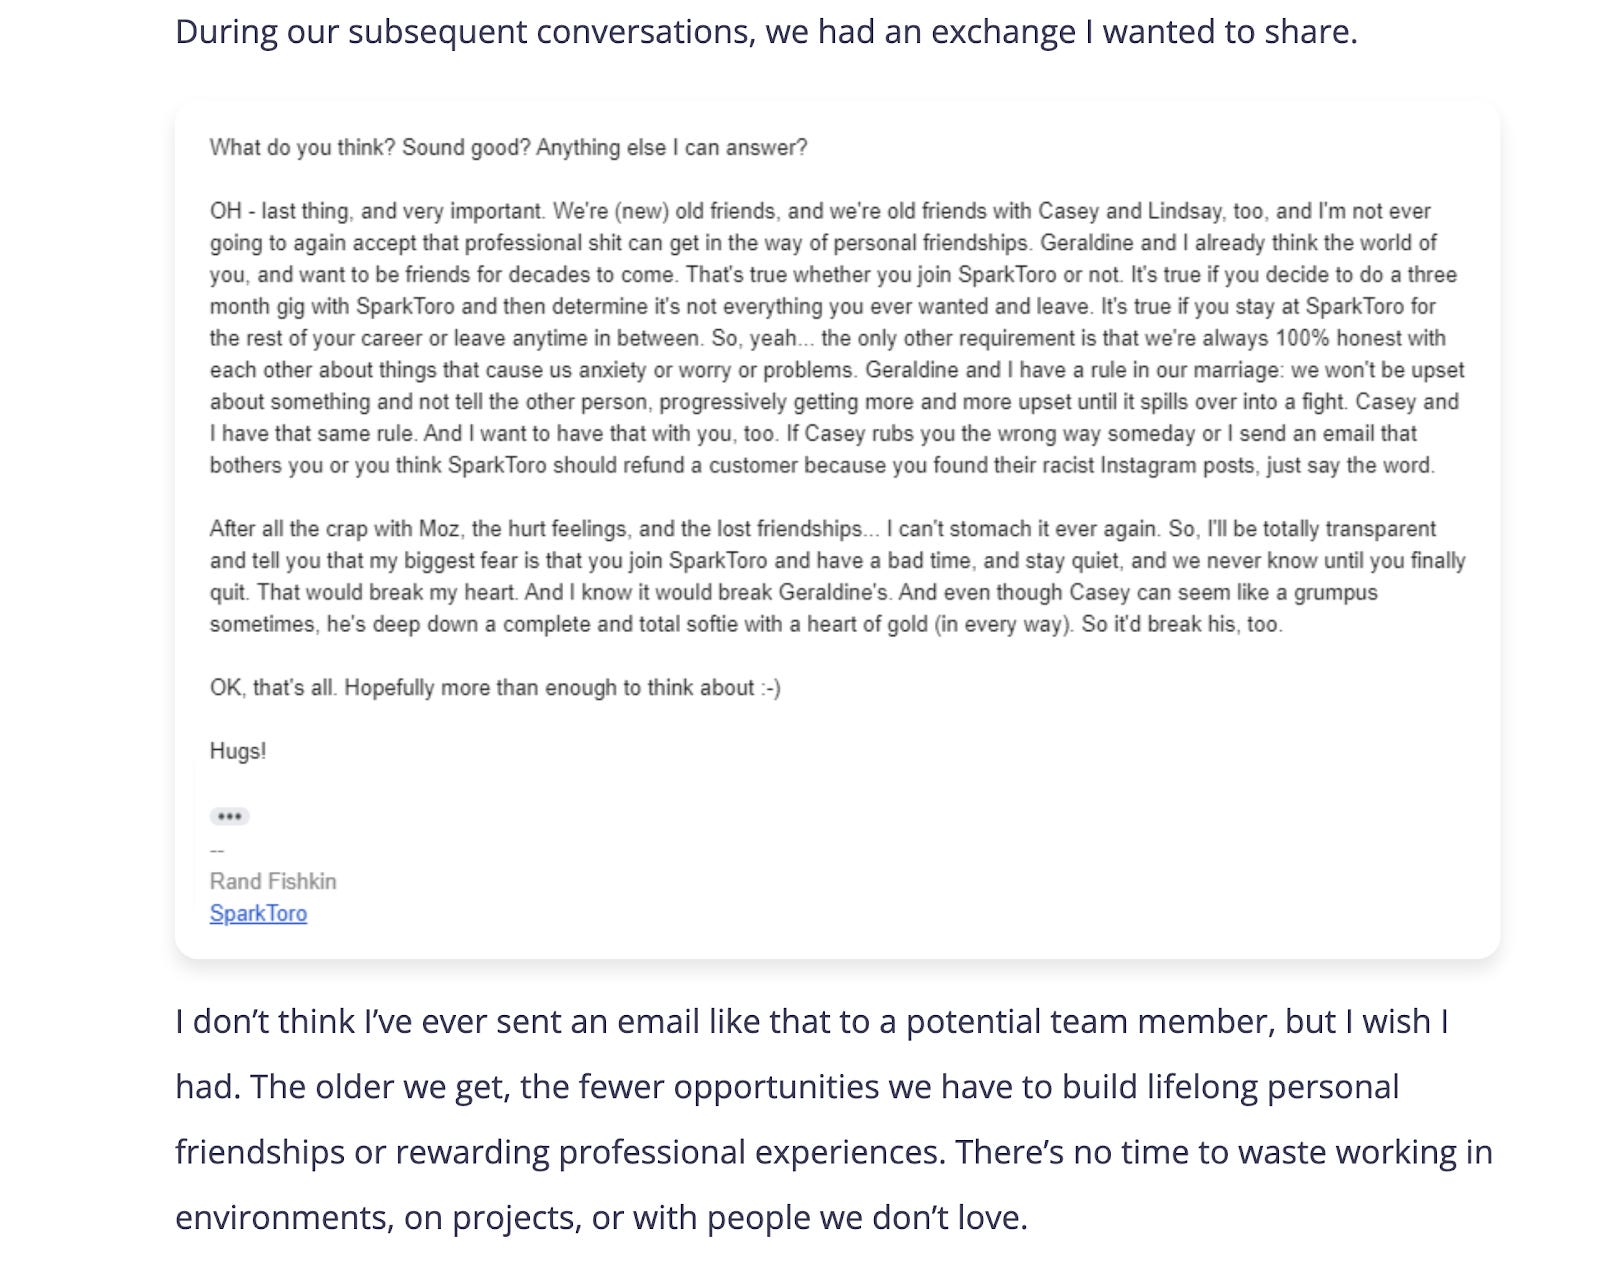 A screenshot from SparkToro's post announcing that Amanda was joining their team. Rand included the full text of an extremely heartfelt email in which he offered Amanda the job.